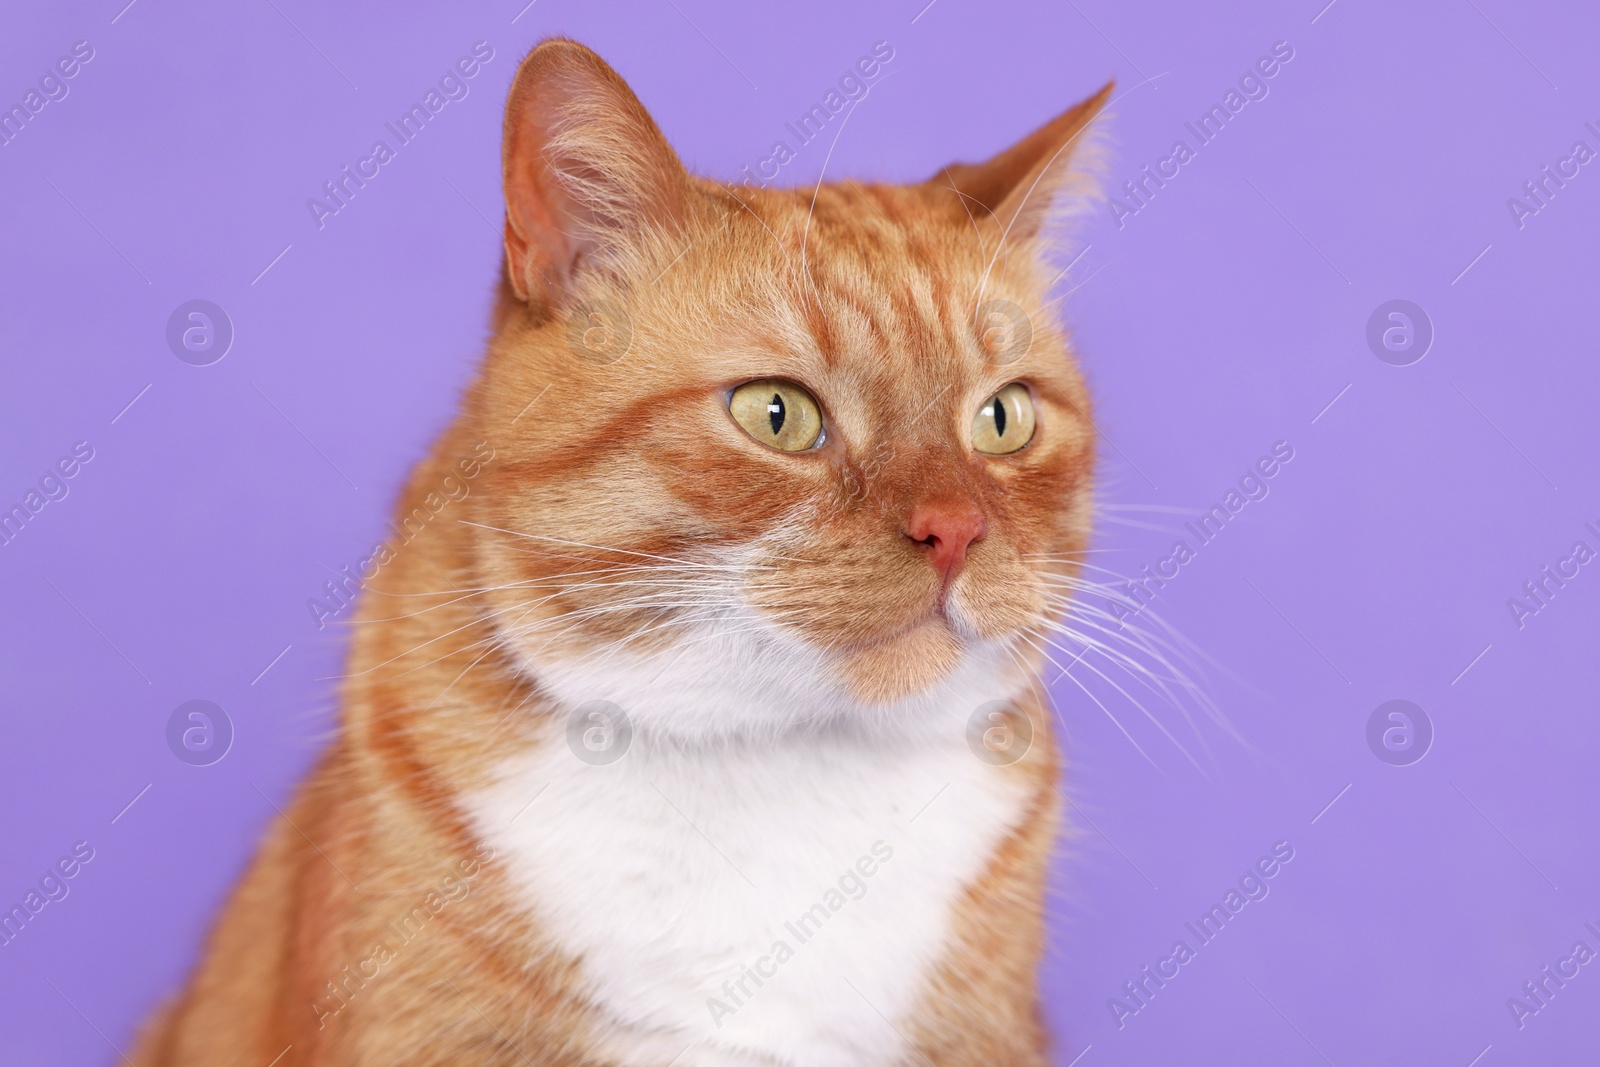 Photo of Adorable red fluffy cat on lilac background